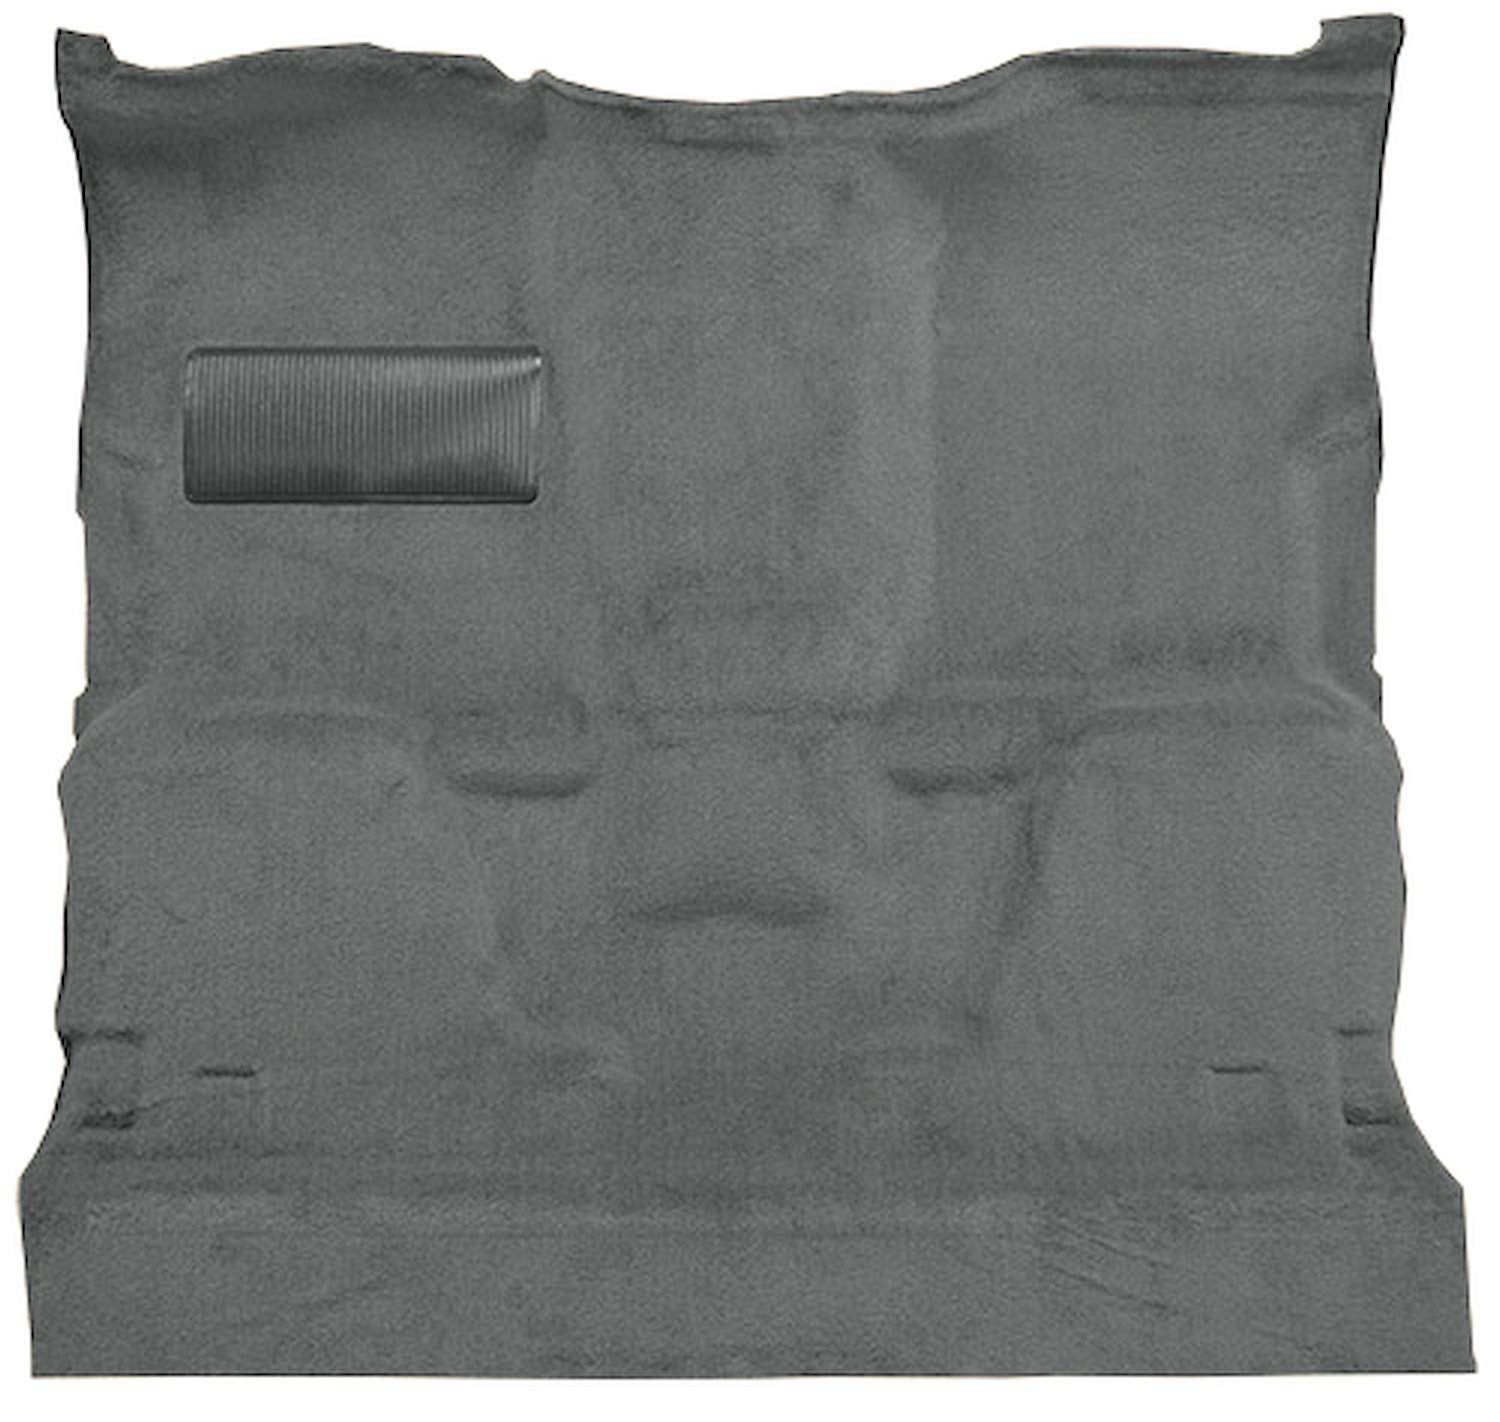 Molded Cut Pile Carpet for 1981-1986 GM C Series Regular Cab Trucks w/Automatic or 3-Speed [Mass Backing Dove Gray]